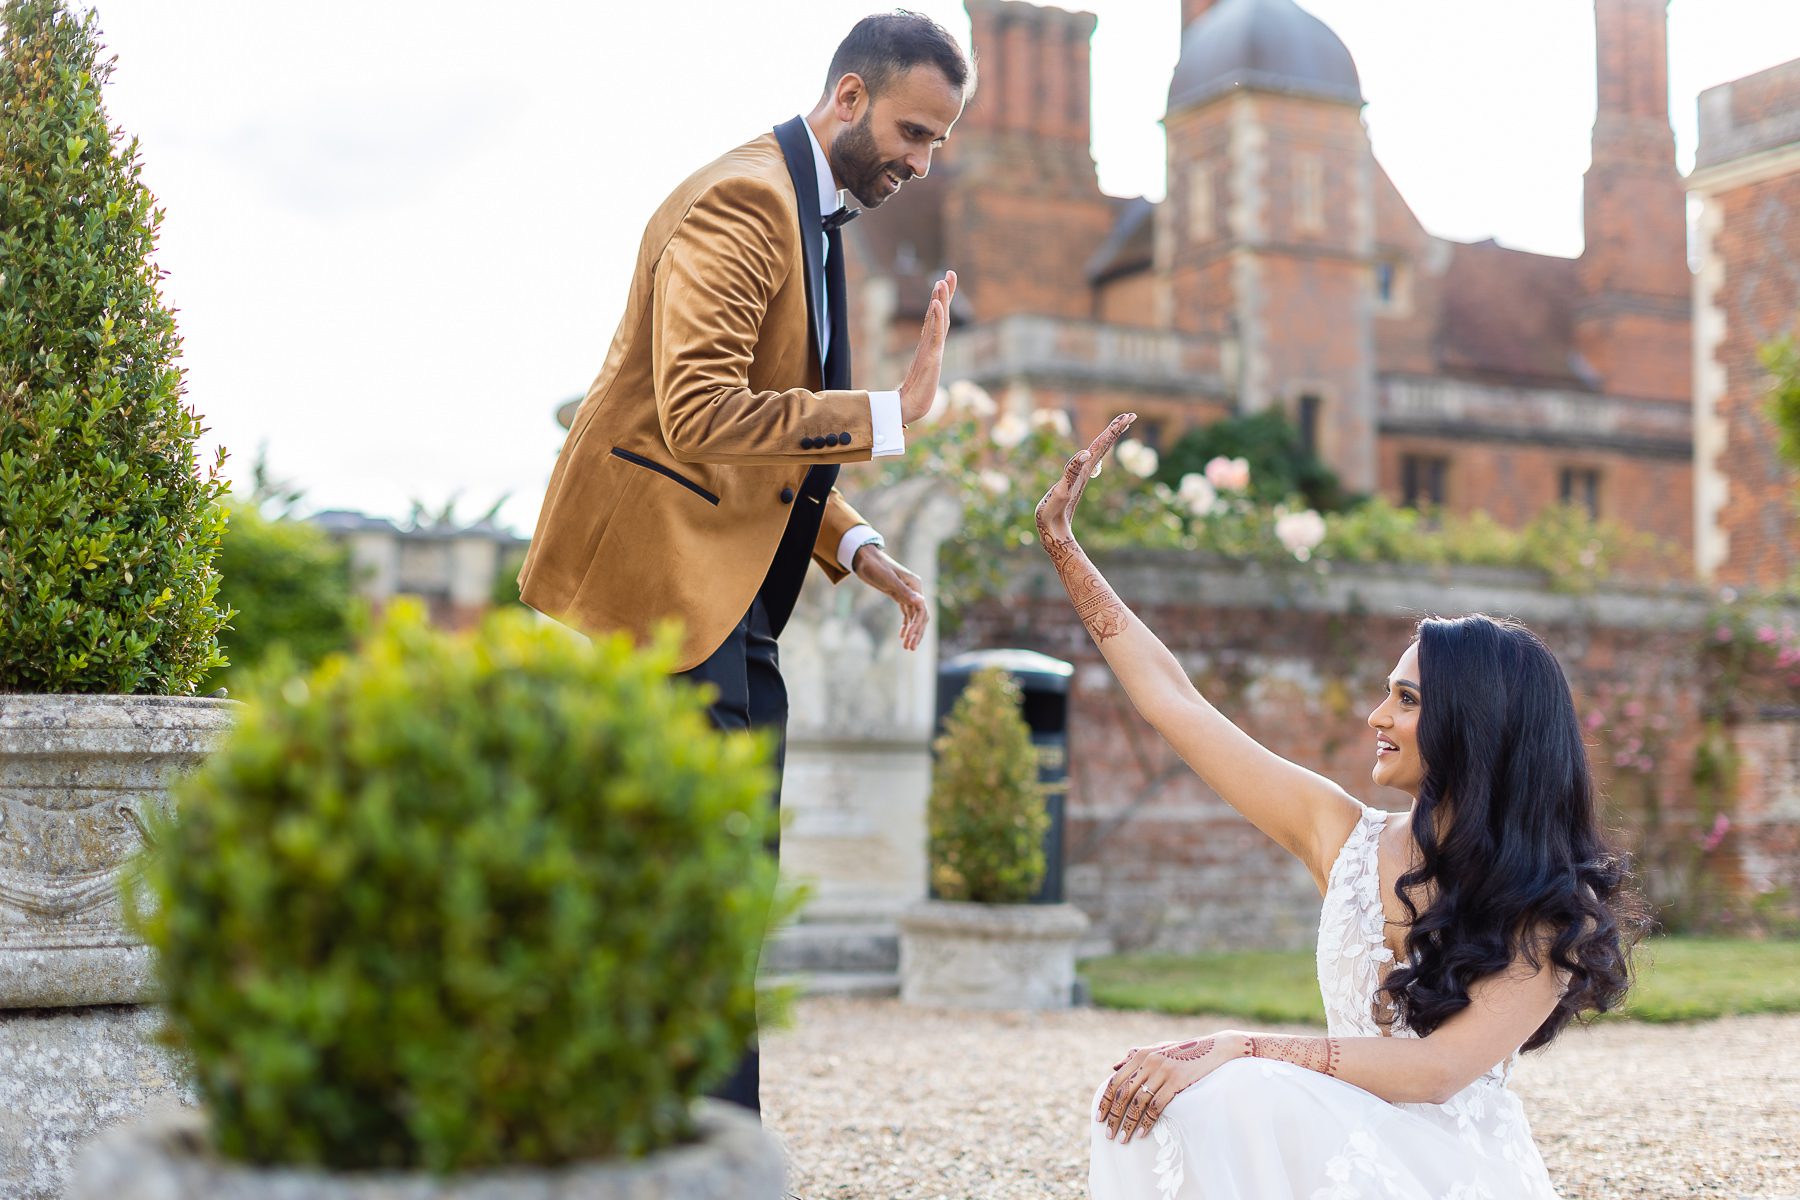 Indian wedding portraits at North Mymms Park